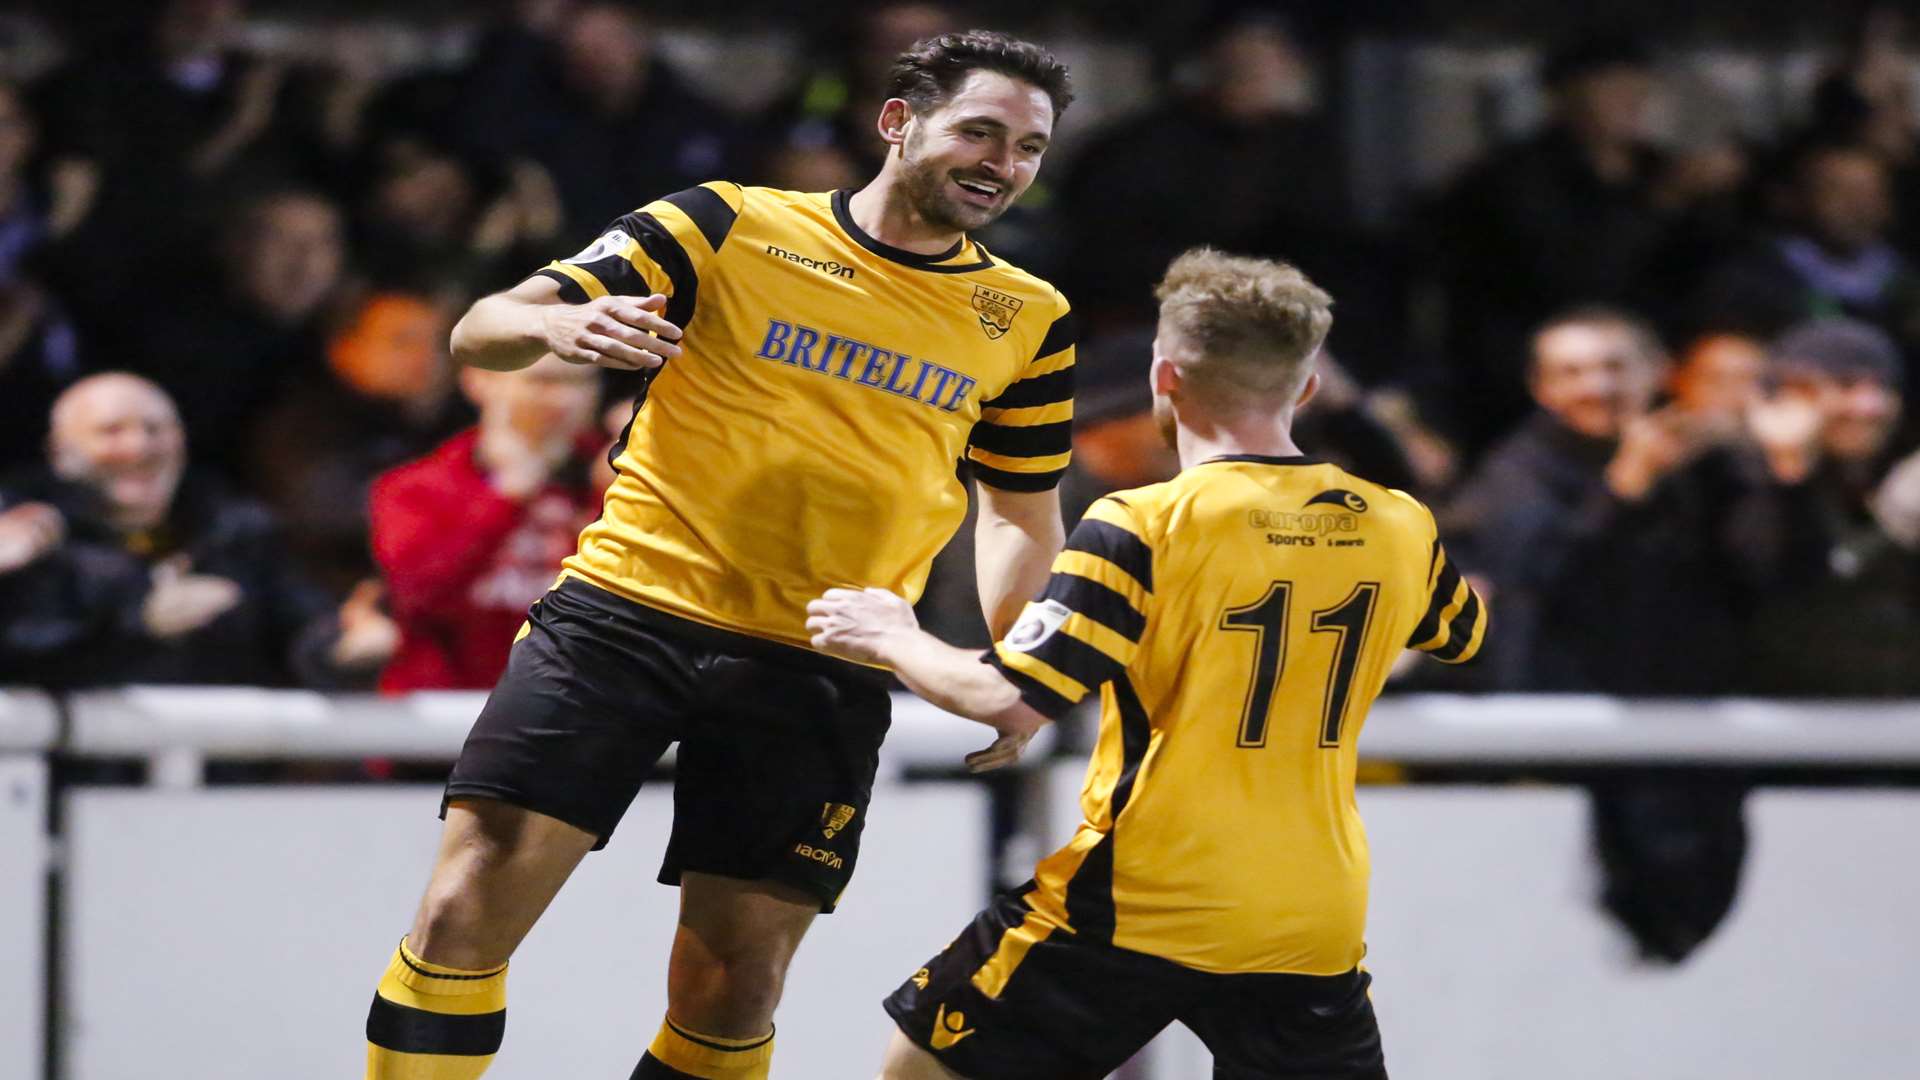 Jay May celebrates one of his many goals for Maidstone Picture: Martin Apps